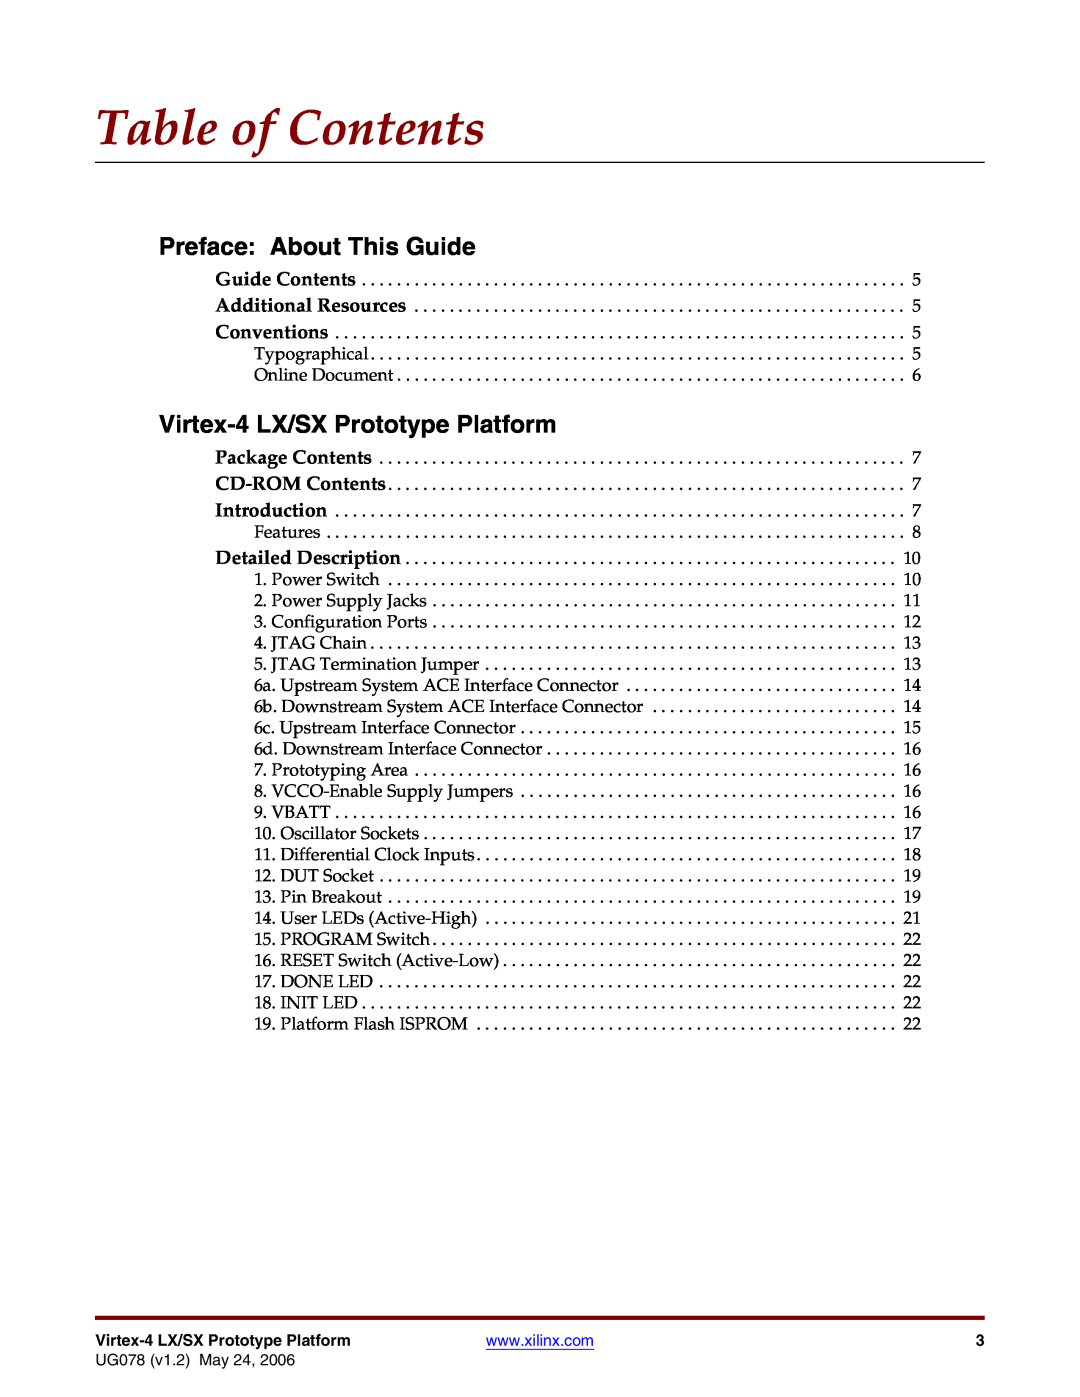 Xilinx UG078 manual Table of Contents, Preface About This Guide, Virtex-4LX/SX Prototype Platform 